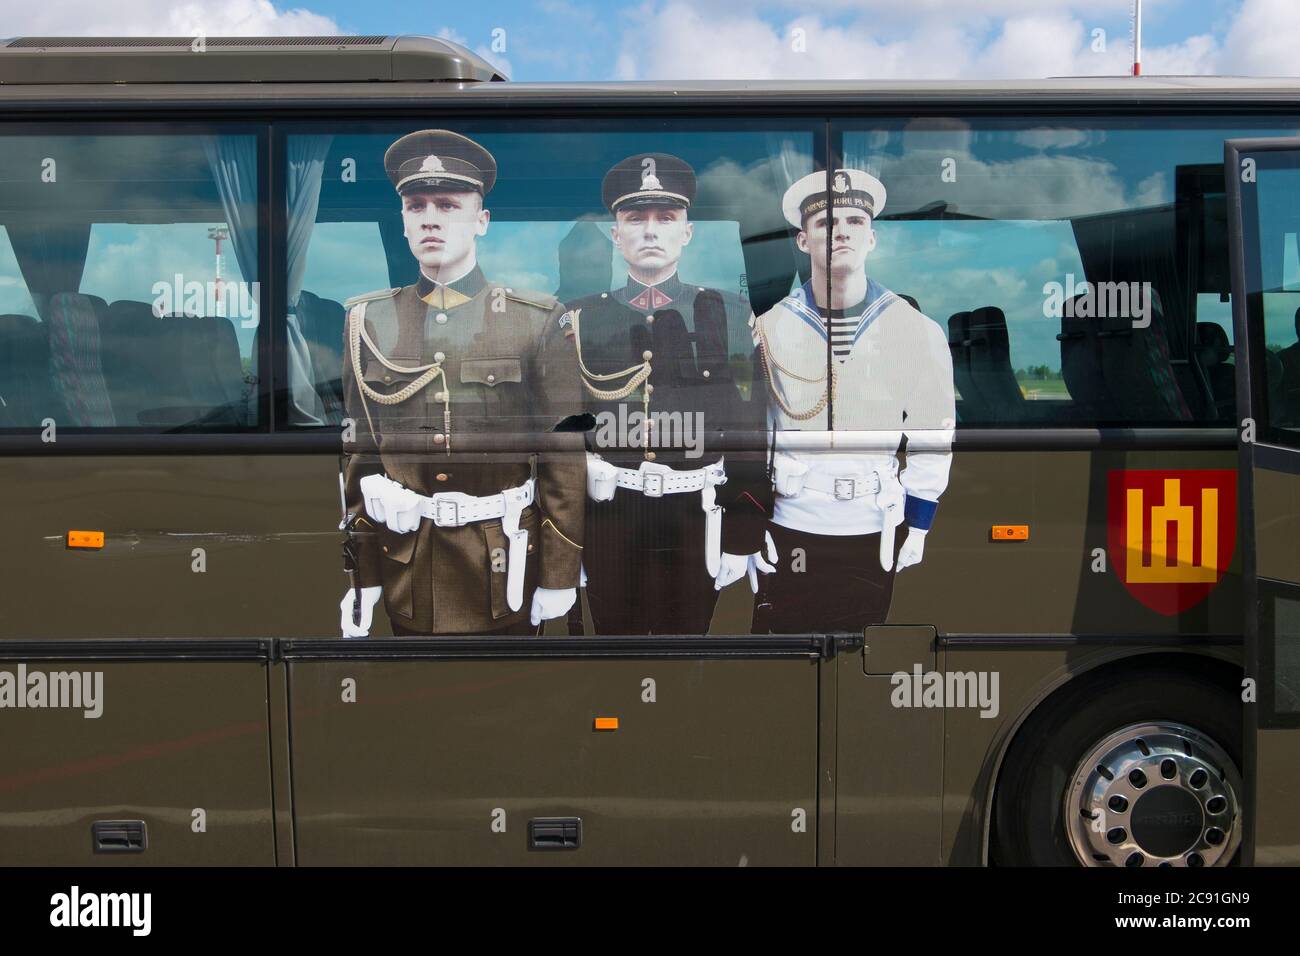 Pictures of Lithuanian military officers on a transport bus.  On the Tarmac at the Vilnius International Airport in Lithuania. Stock Photo